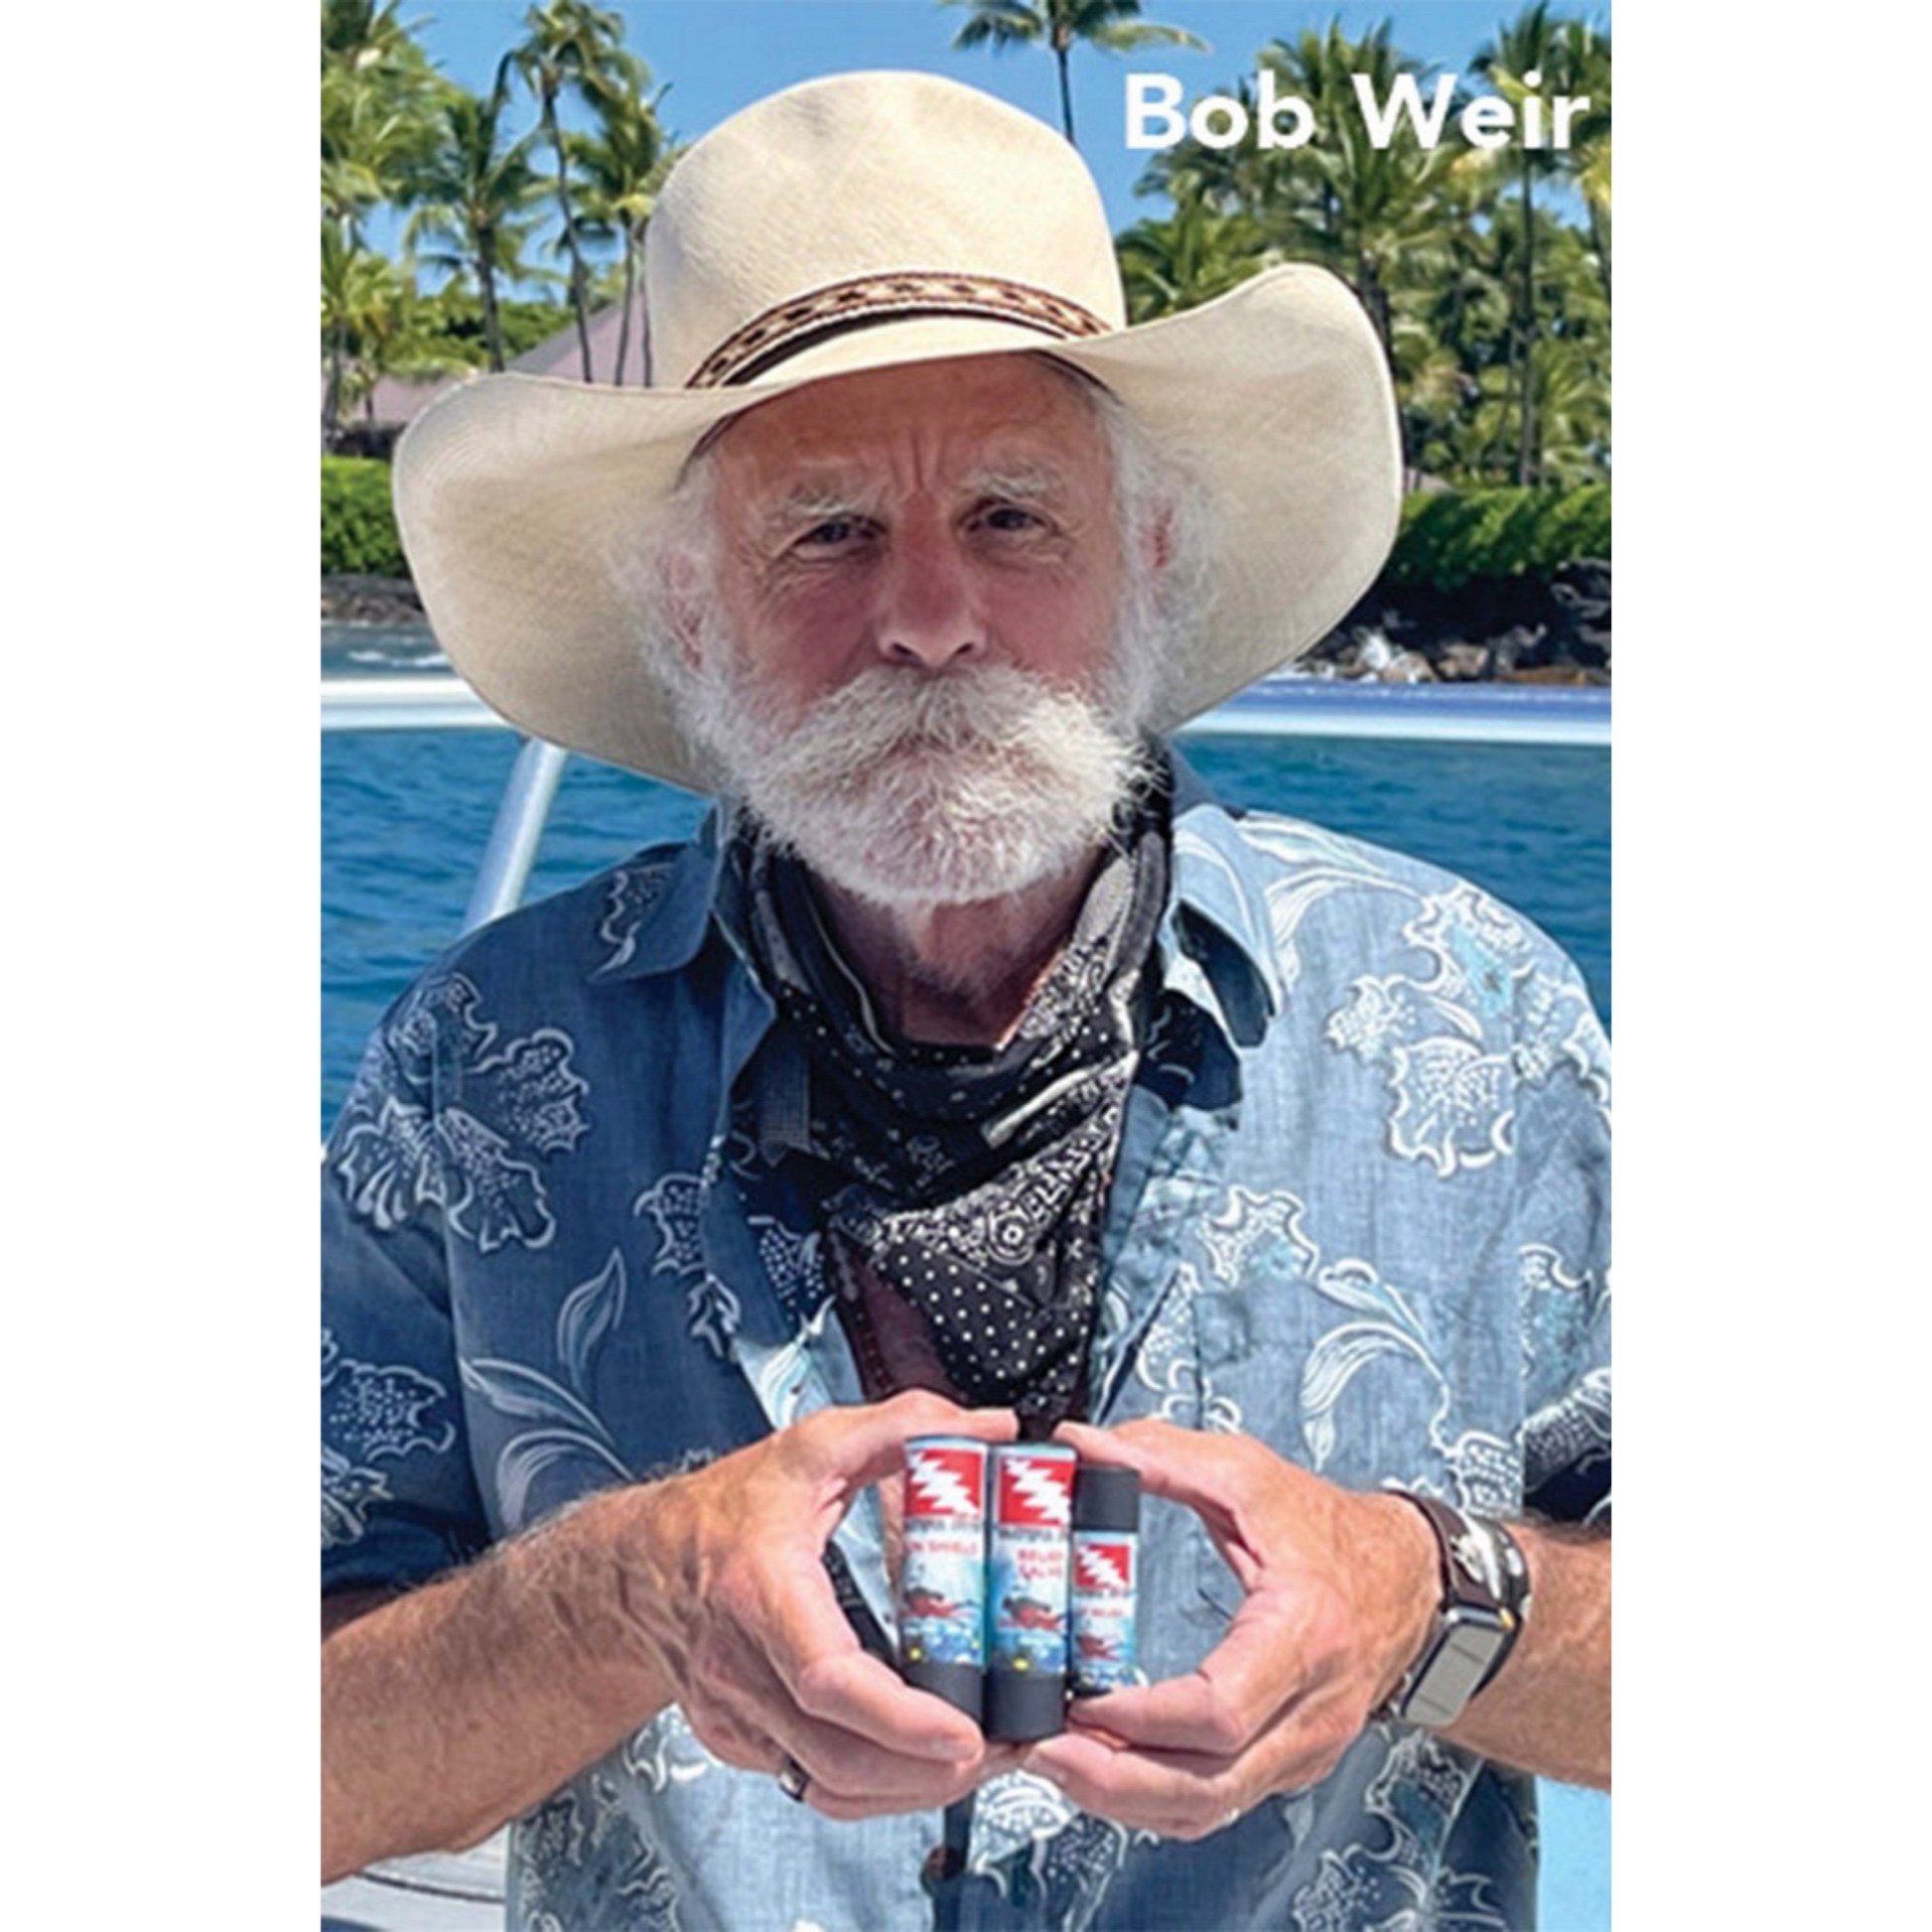 Grateful Diver band member, Bob Weir, holding Grateful Diver skin care products in front of pool